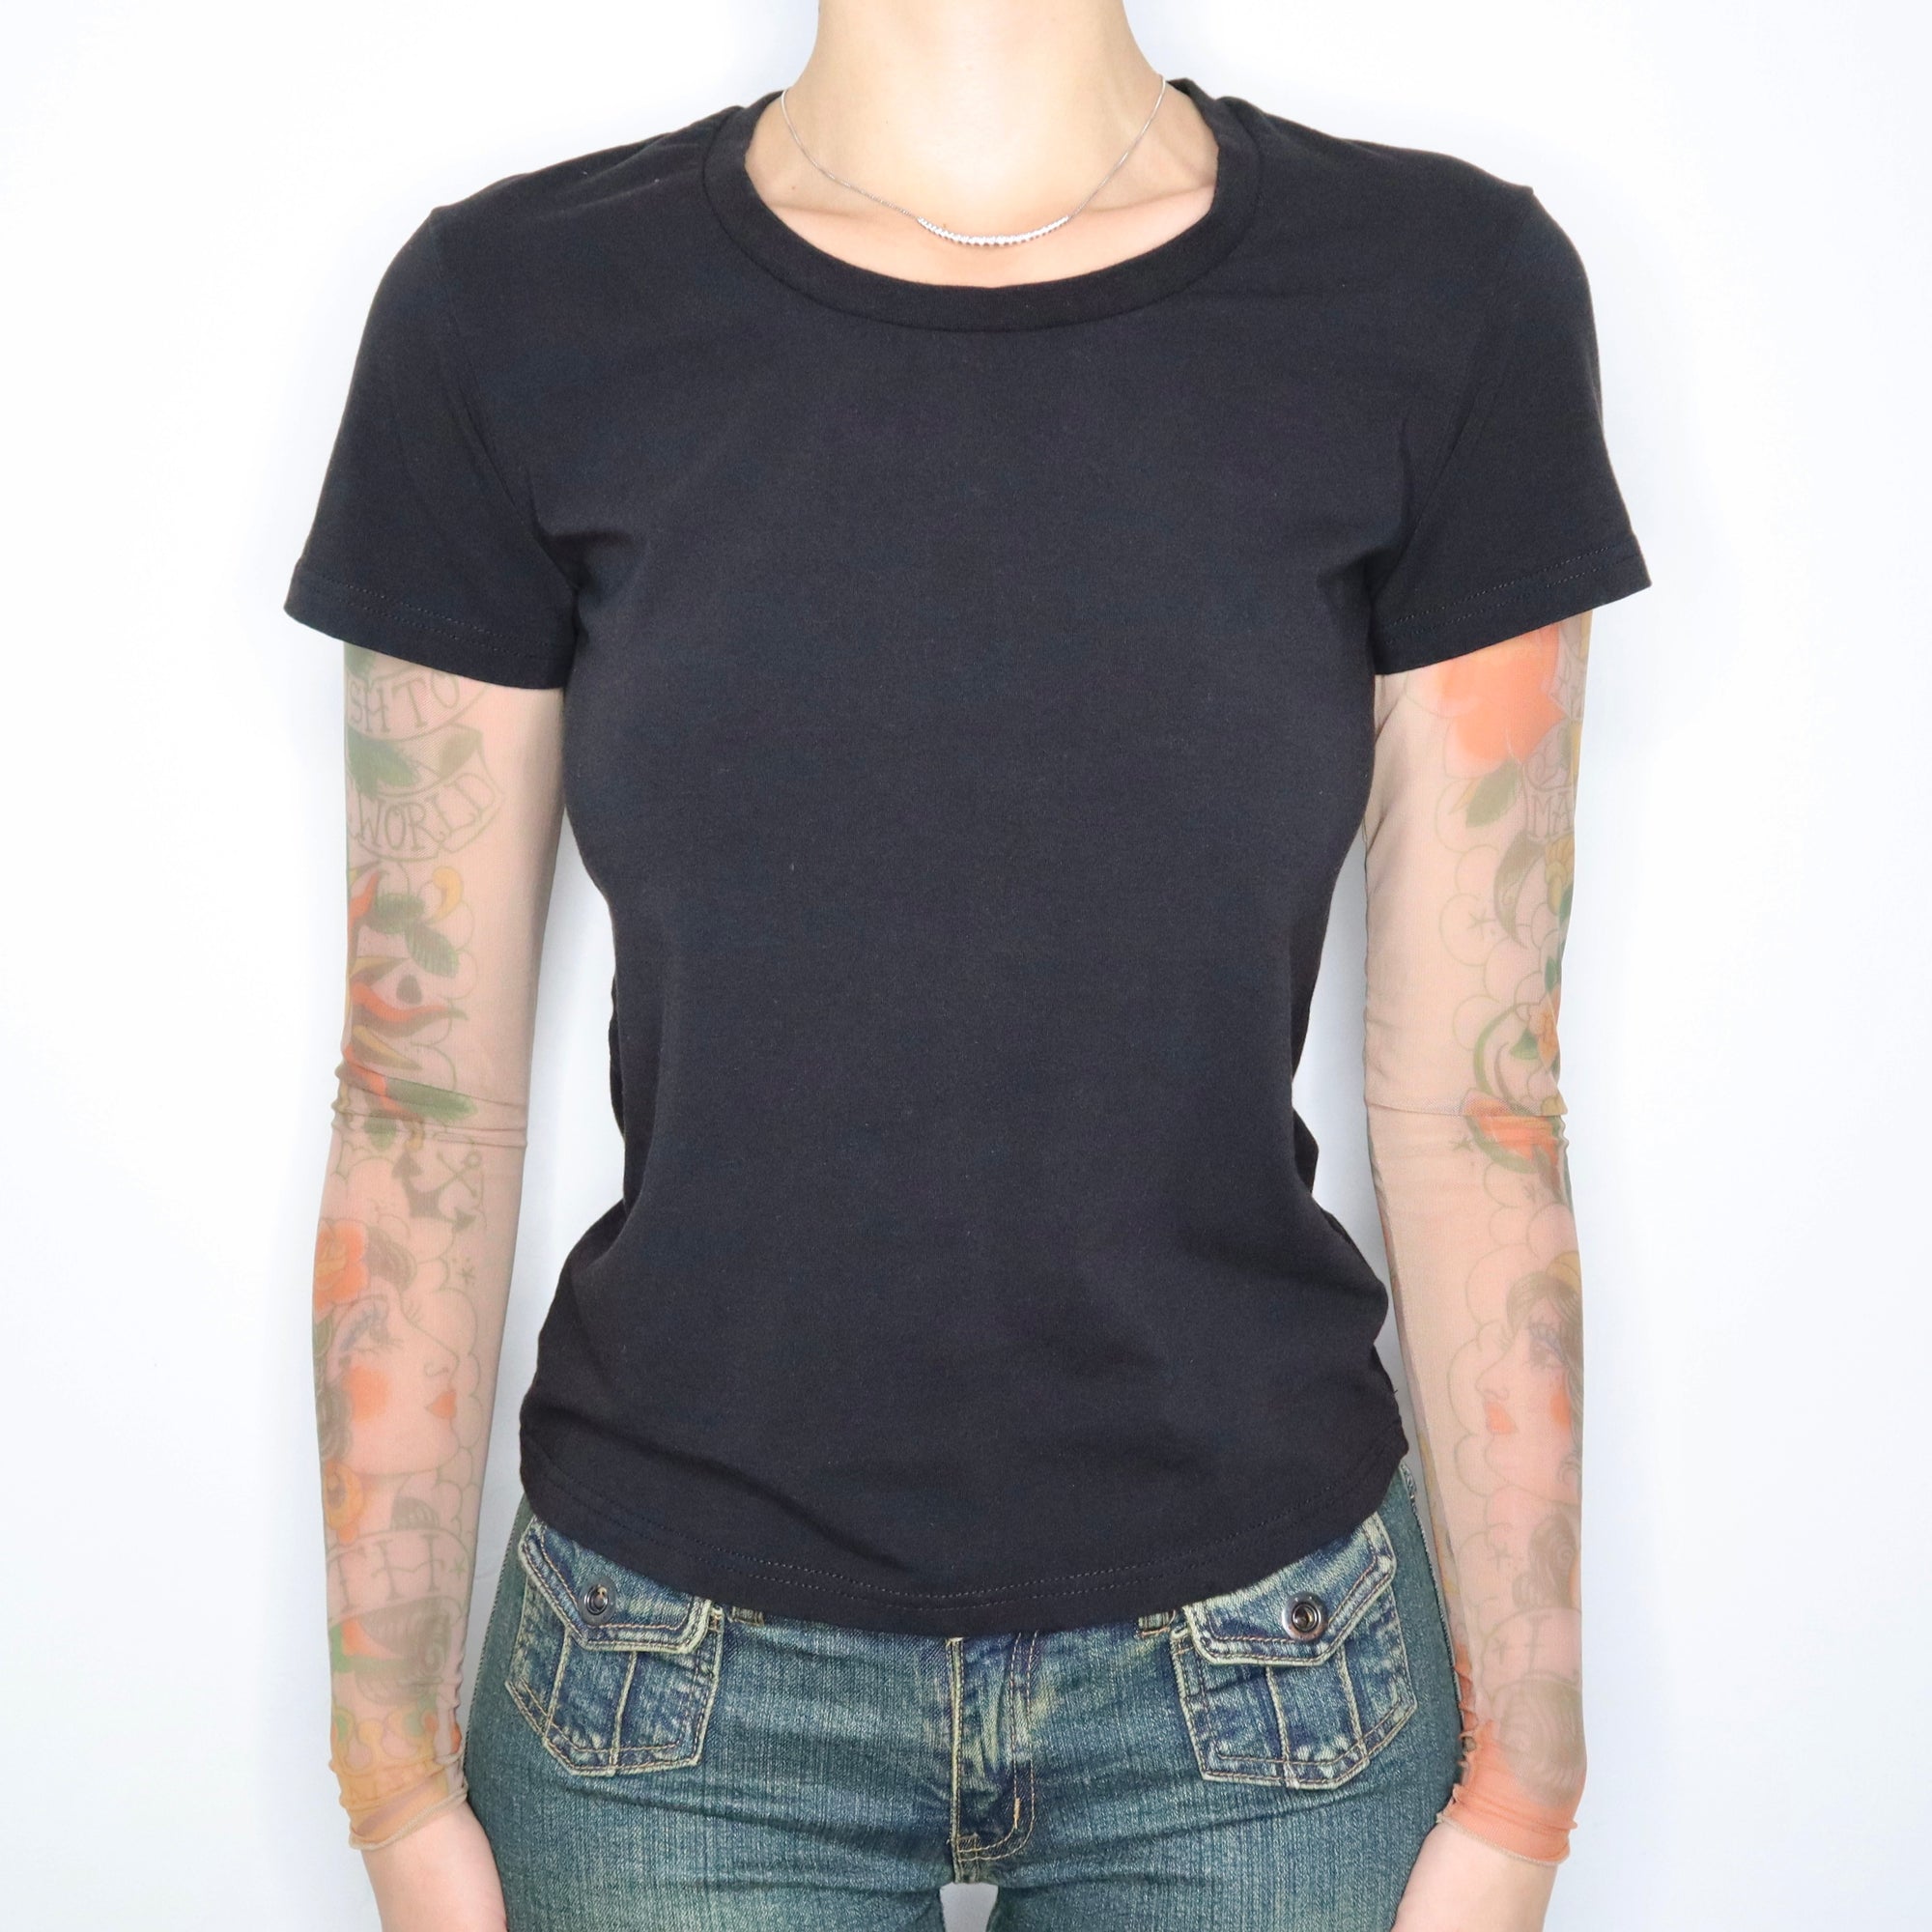 Vintage Early 2000s Black Tee with Tattoo Mesh Long Sleeves